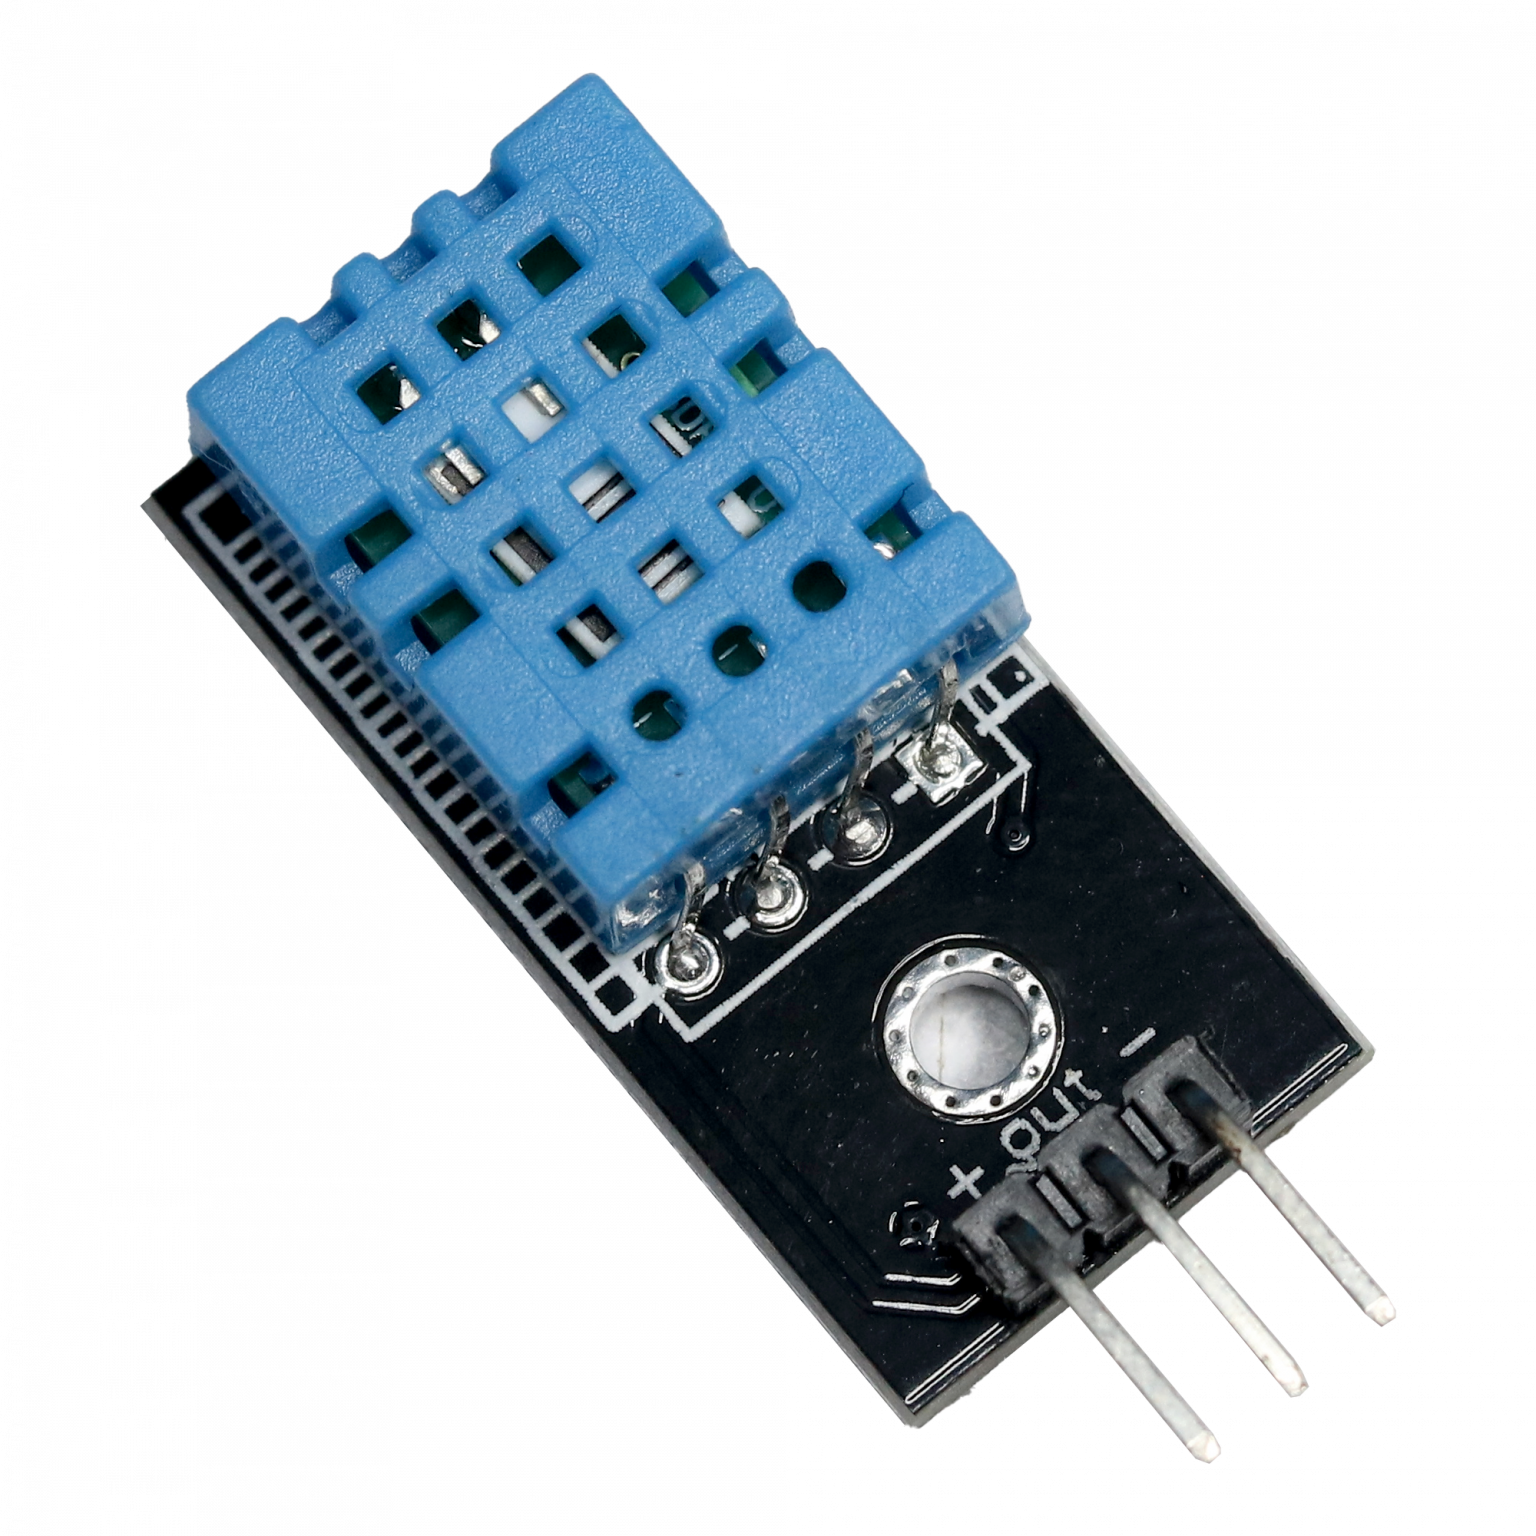 Dht11 Temperature And Humidity Sensor Module Techiesms 6642